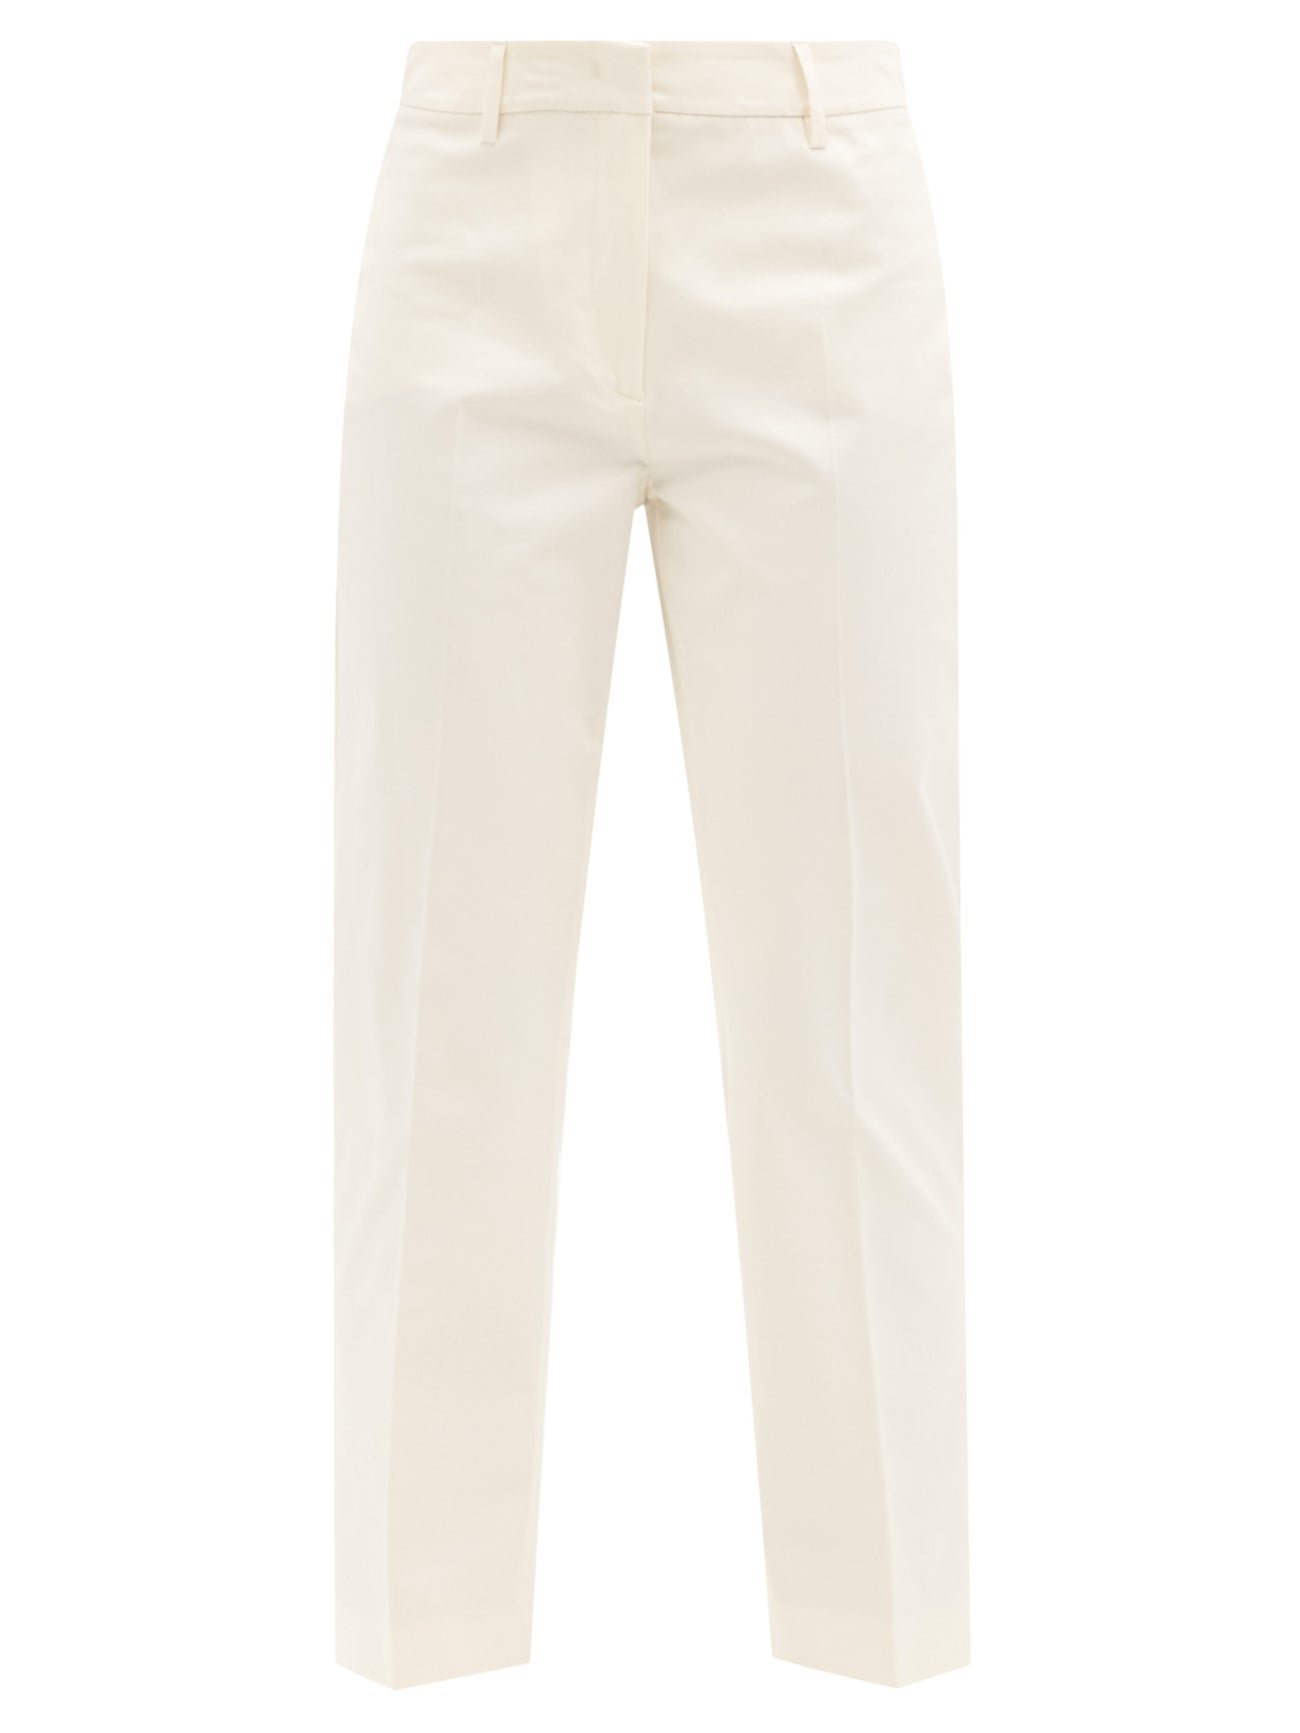 WEEKEND MAX MARA Cecco Trousers in Ivory | Endource